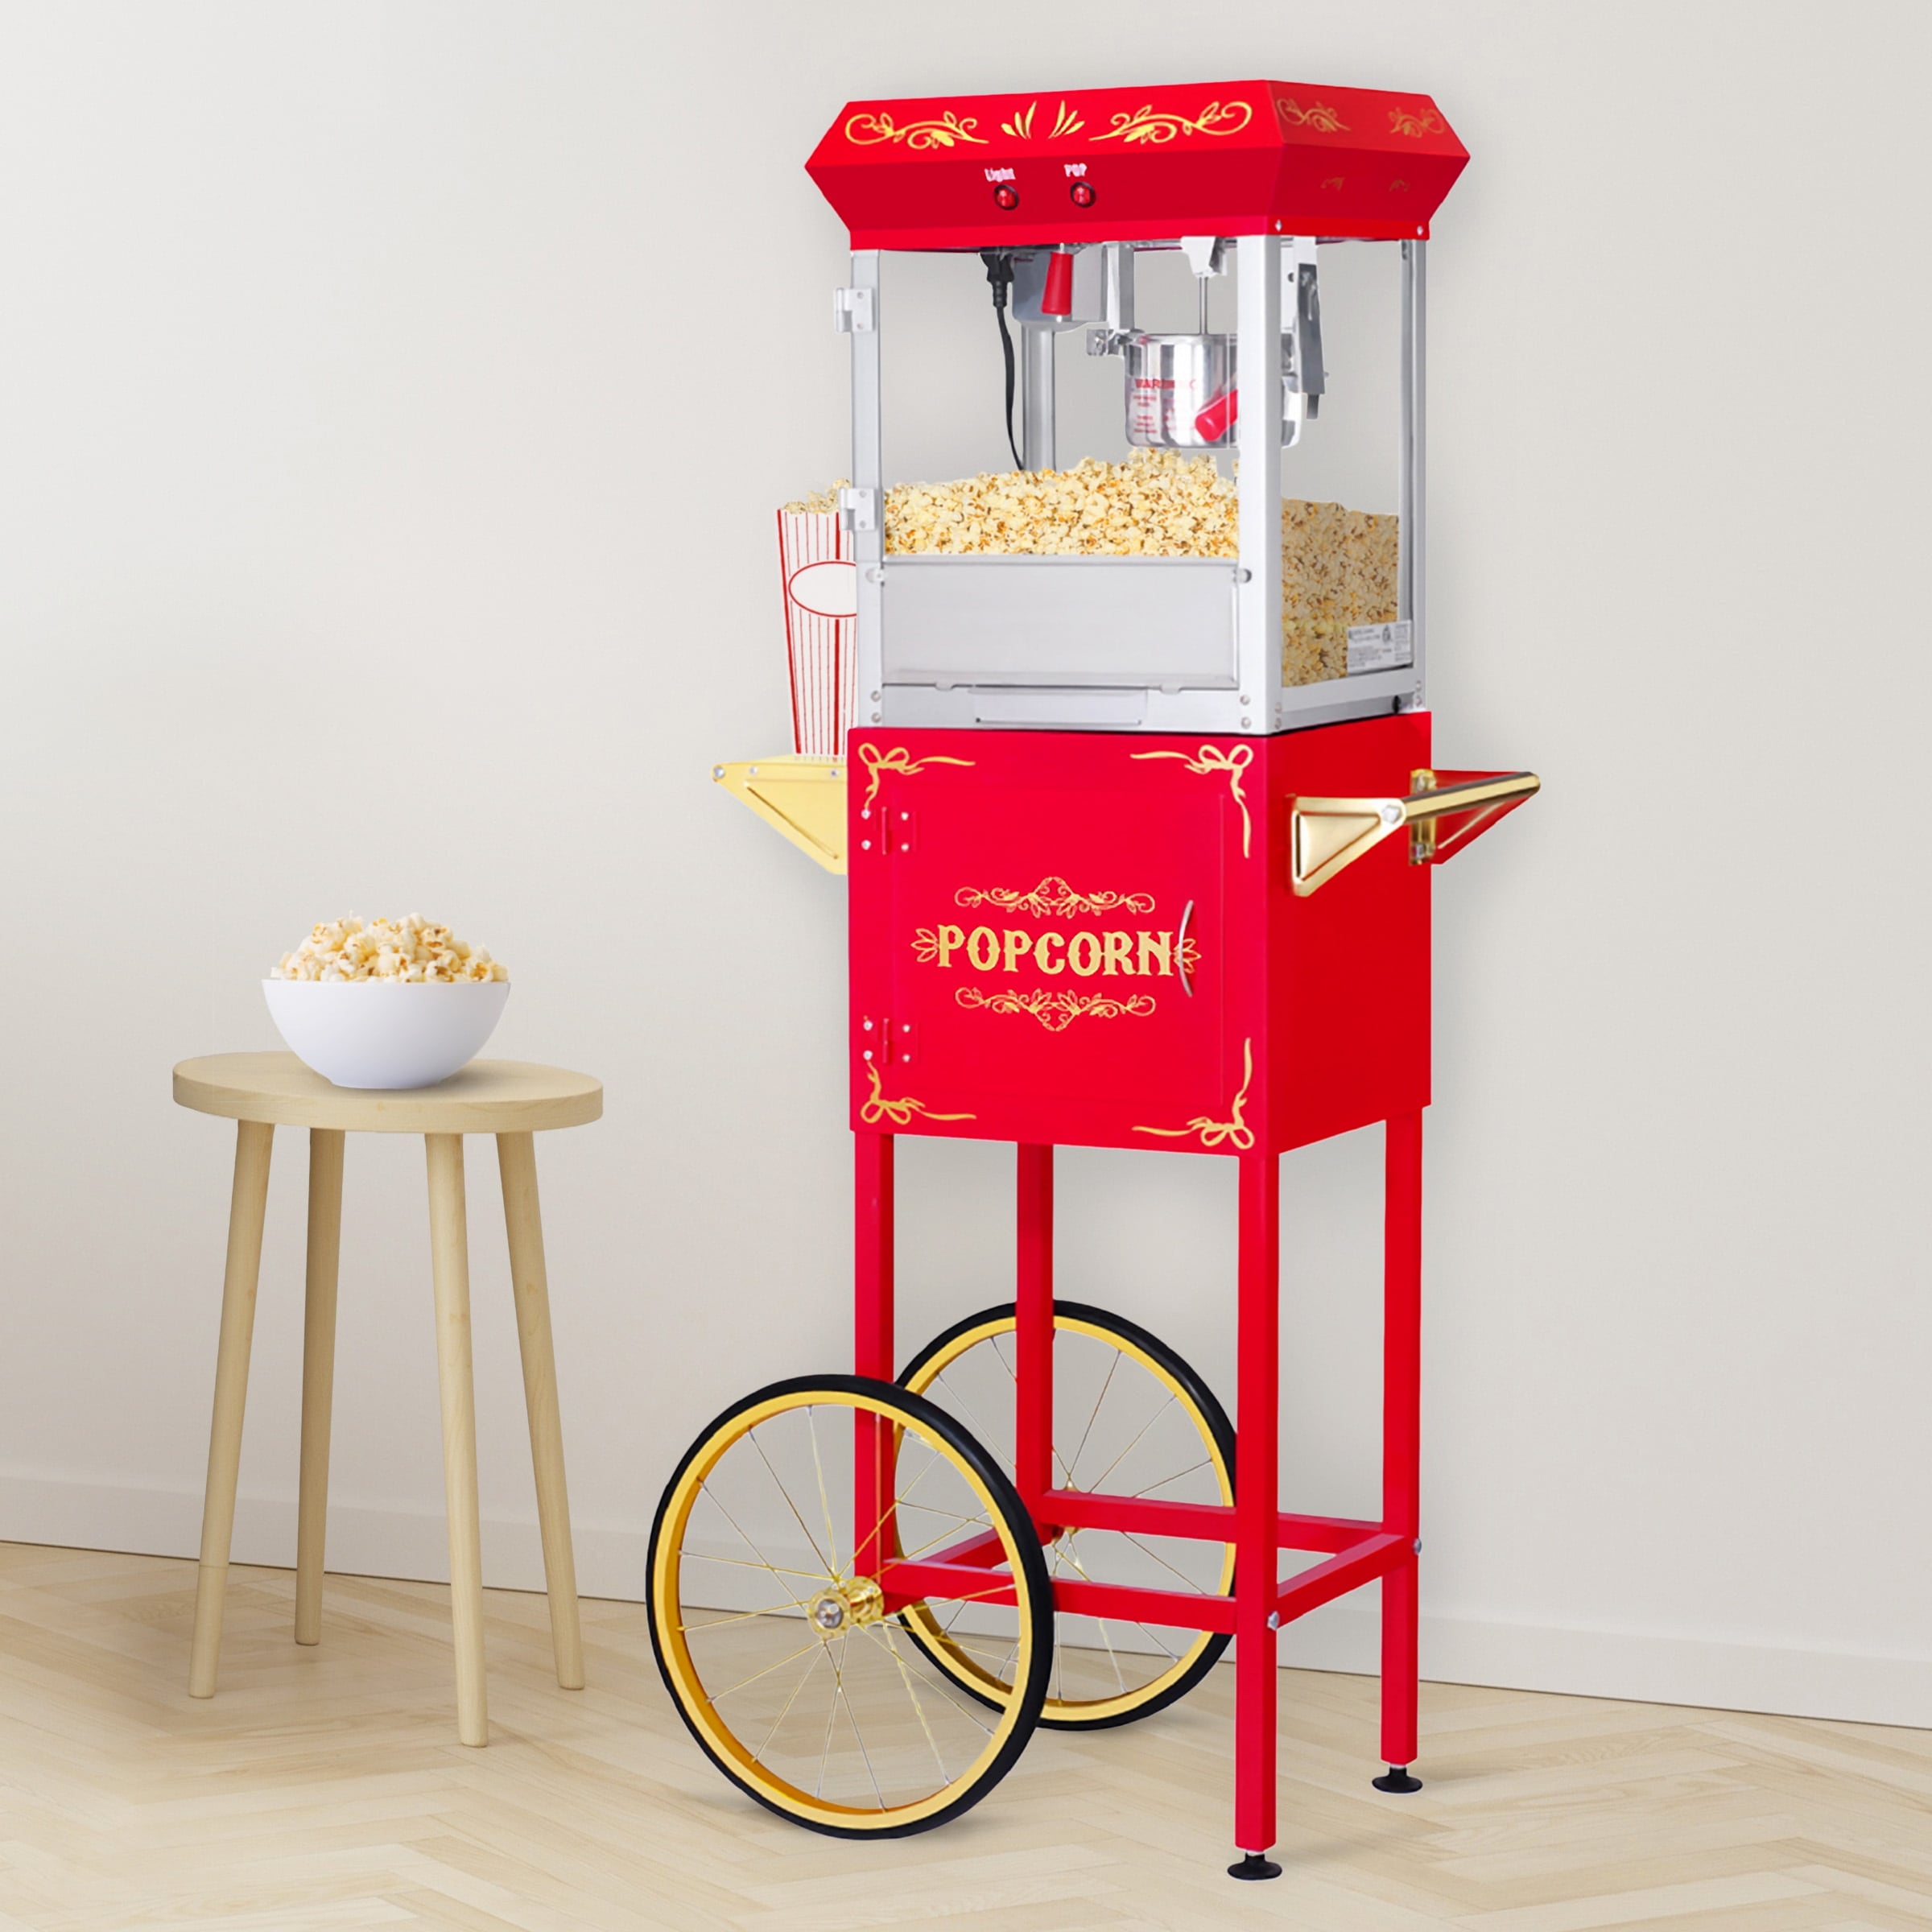 https://ak1.ostkcdn.com/images/products/is/images/direct/3399170a616c38b10862f3e54583e8b5c213f535/Popcorn-Machine-with-Cart-%E2%80%93-6oz-Popper-with-Stainless-steel-Kettle-by-Great-Northern-Popcorn-%28Red%29.jpg